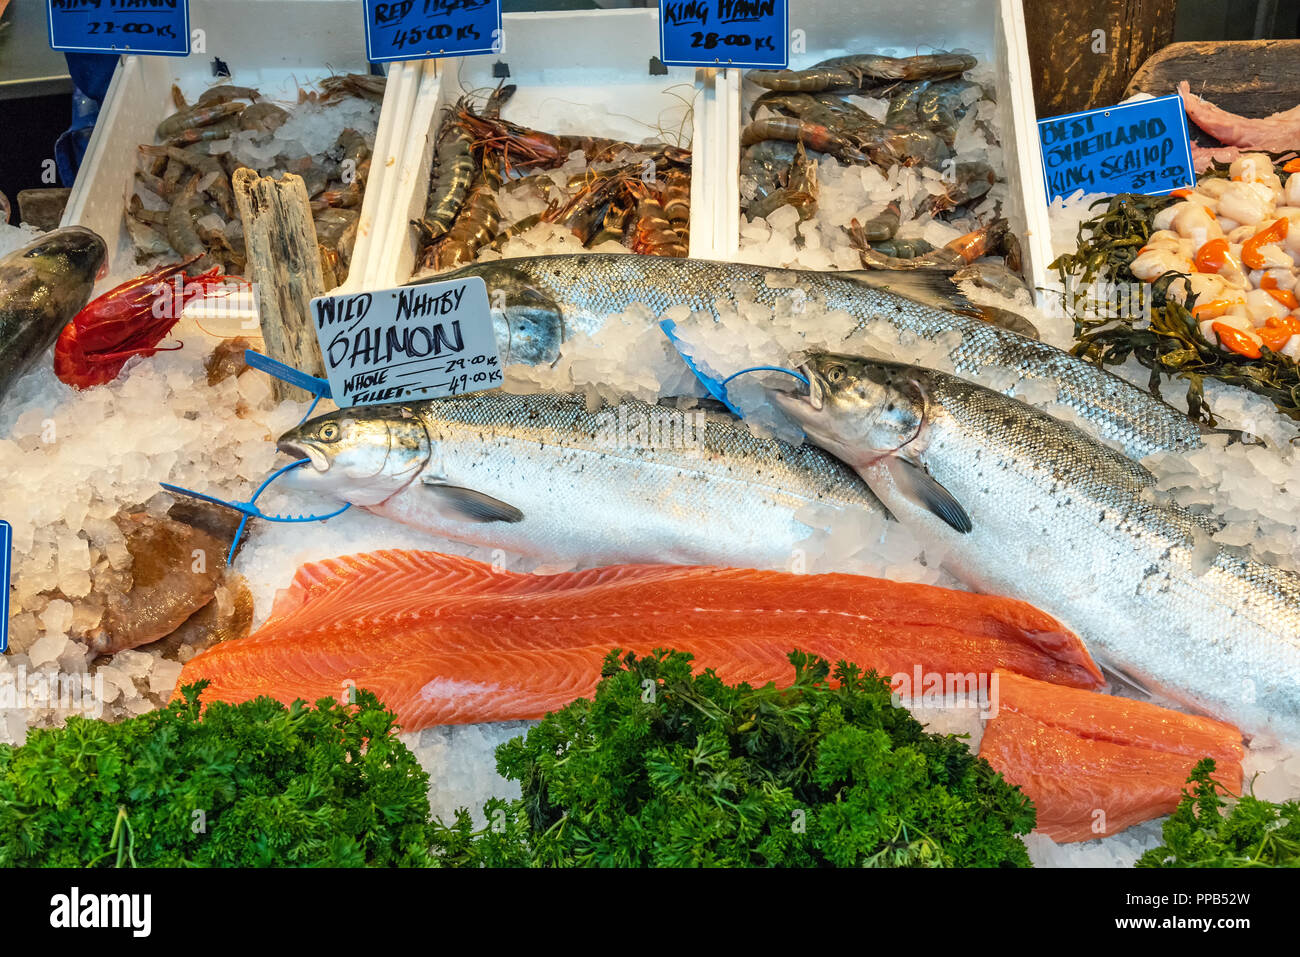 Salmon fillet and other fish and seafood for sale at a market in London Stock Photo